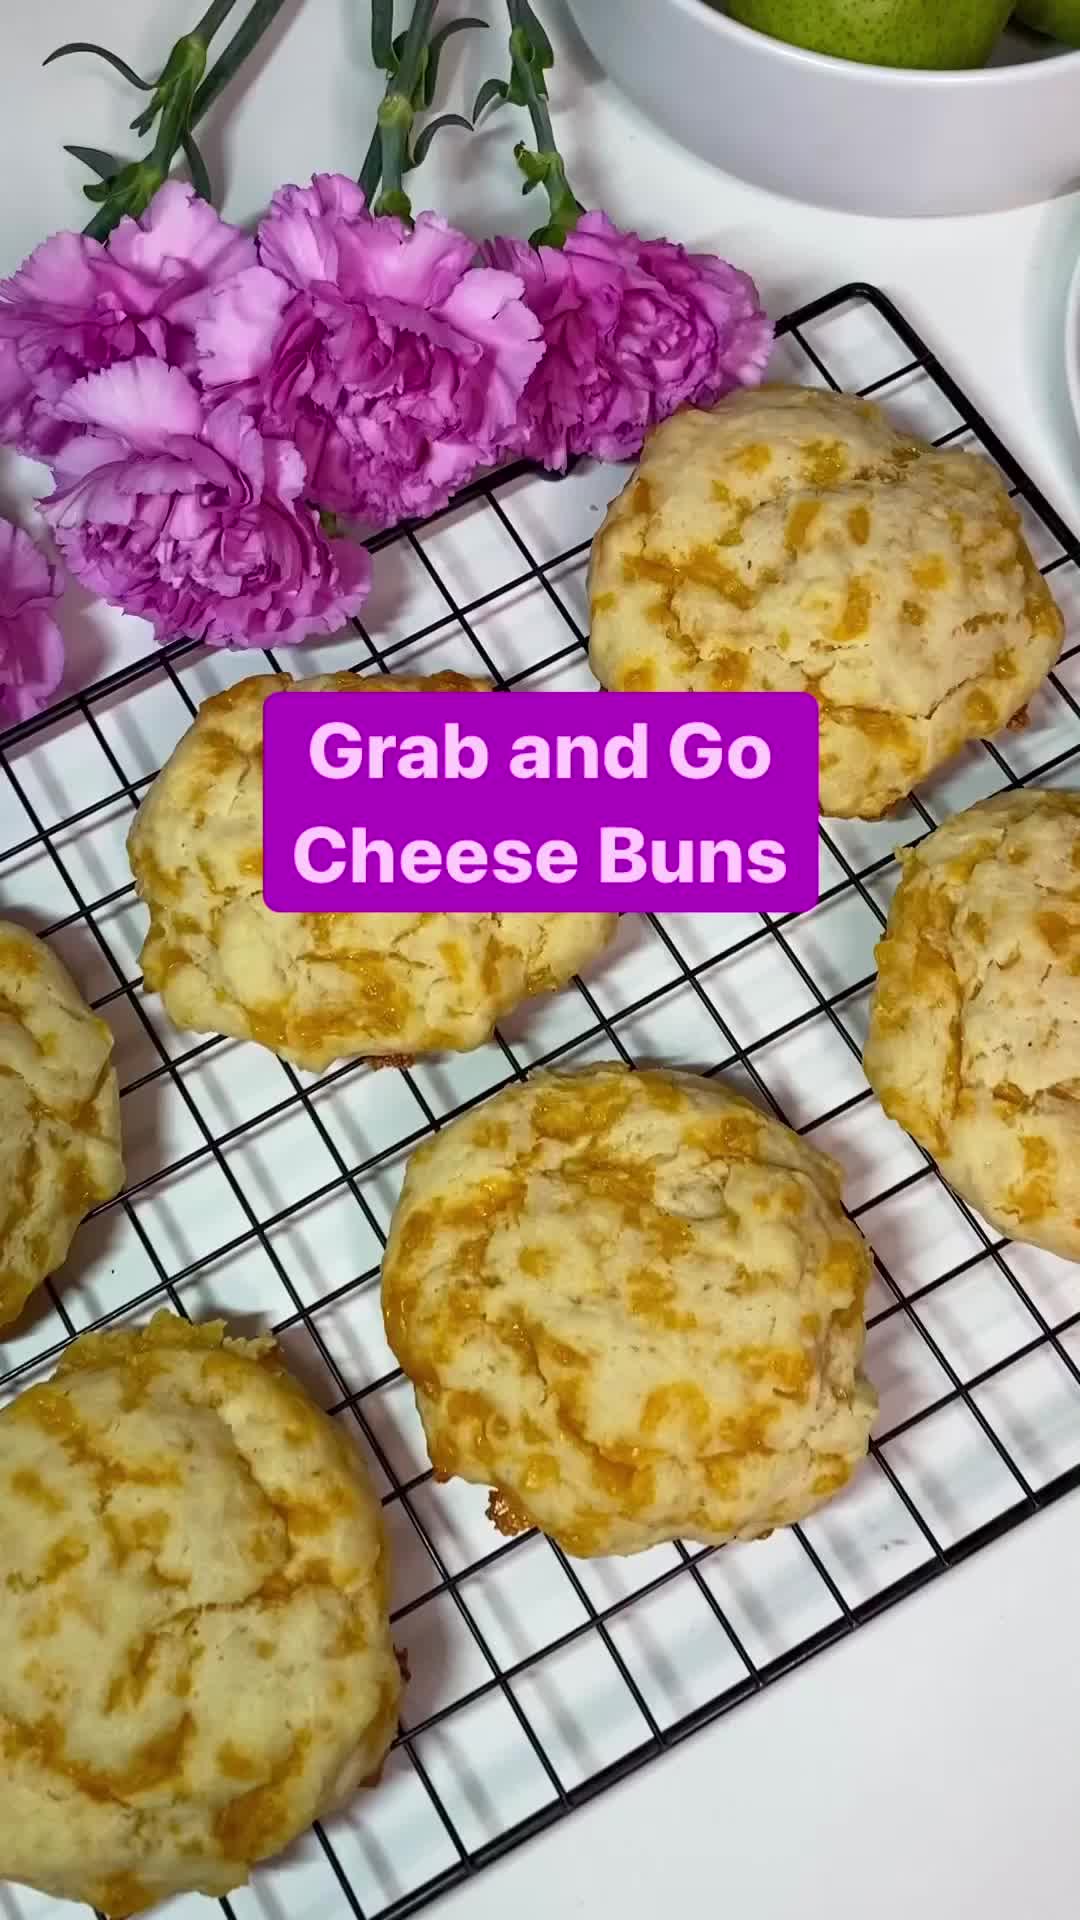 Grab and Go Cheese Buns